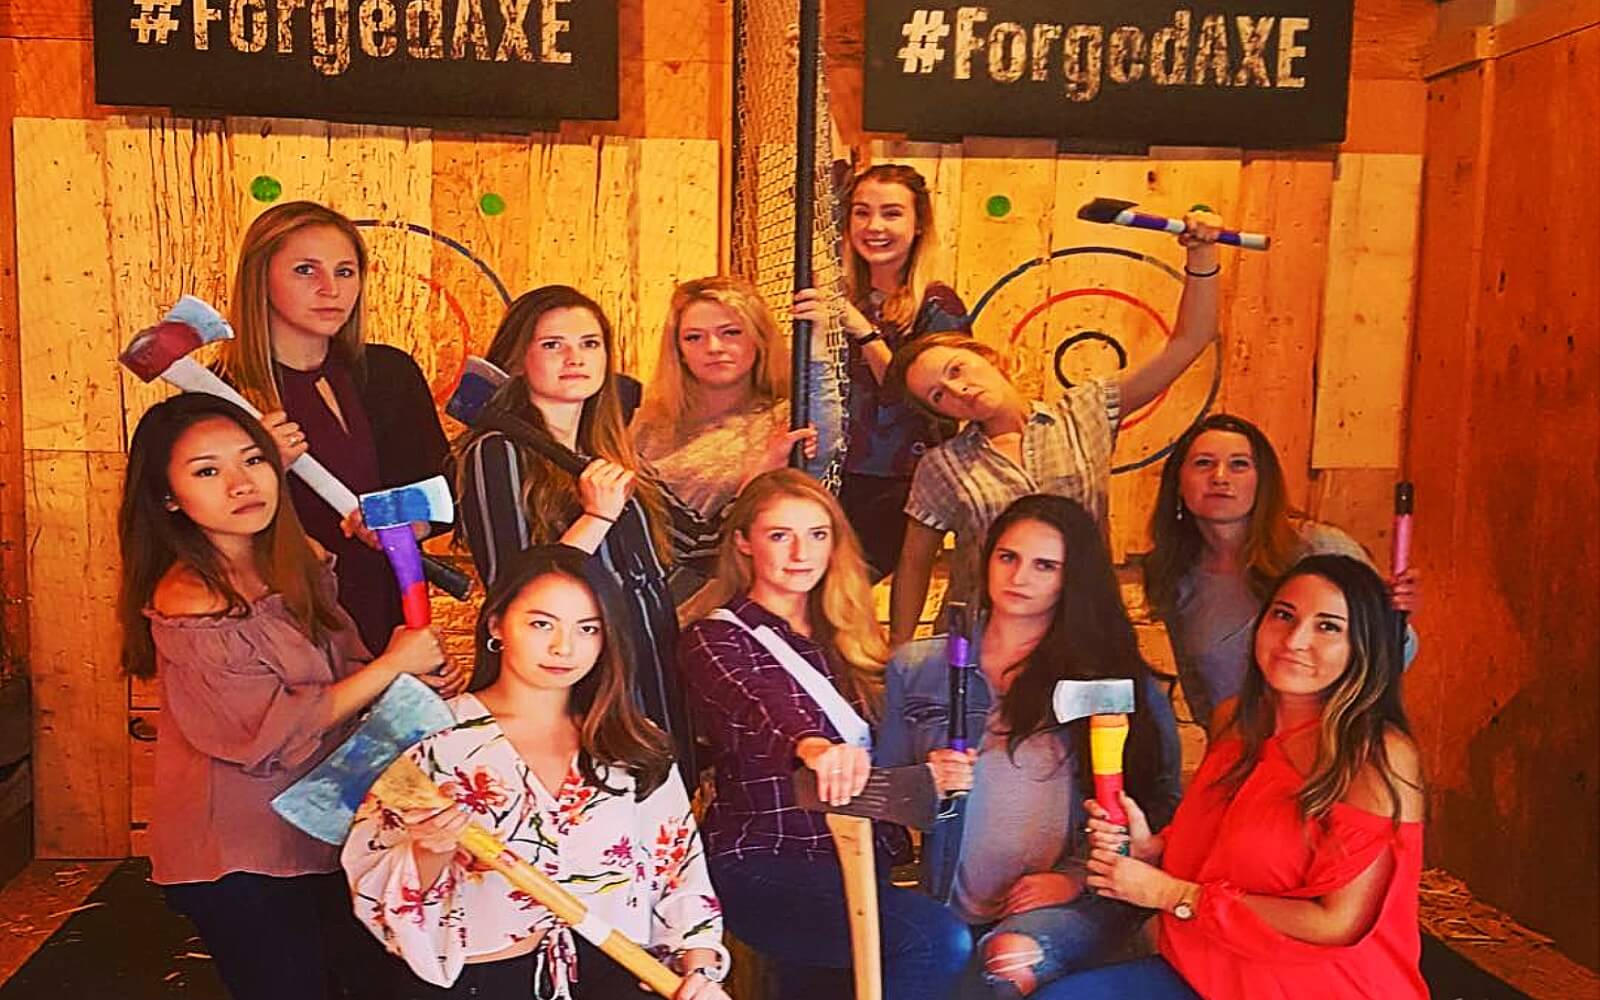 A group of woman pose after a axe throwing contest